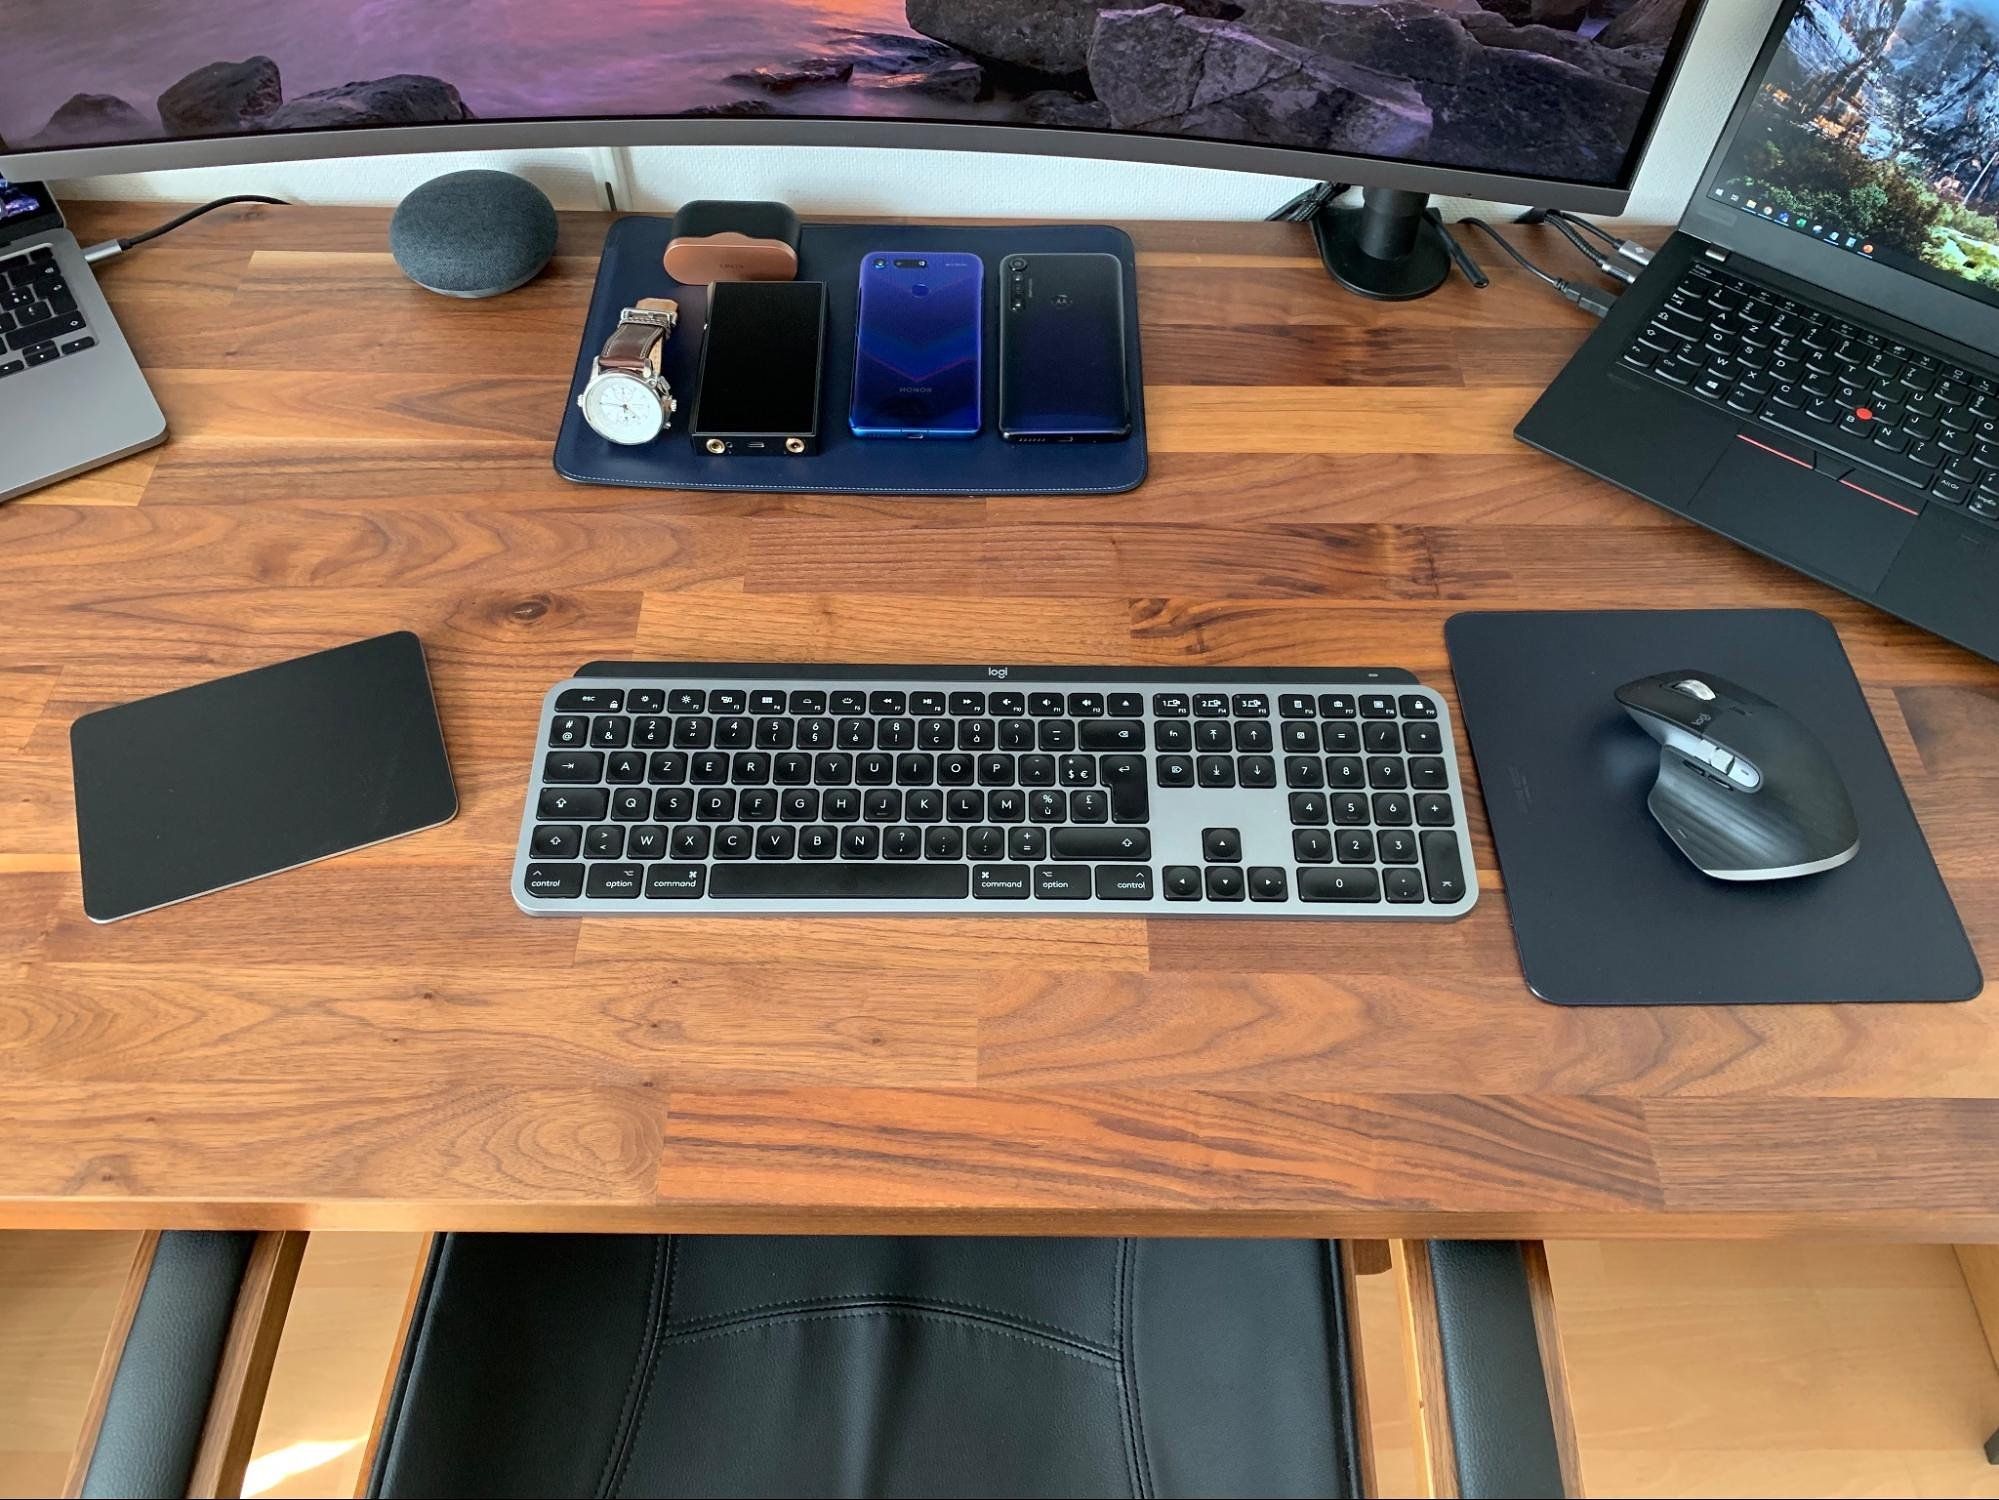 A Logitech keyboard for Mac and other home office peripherals